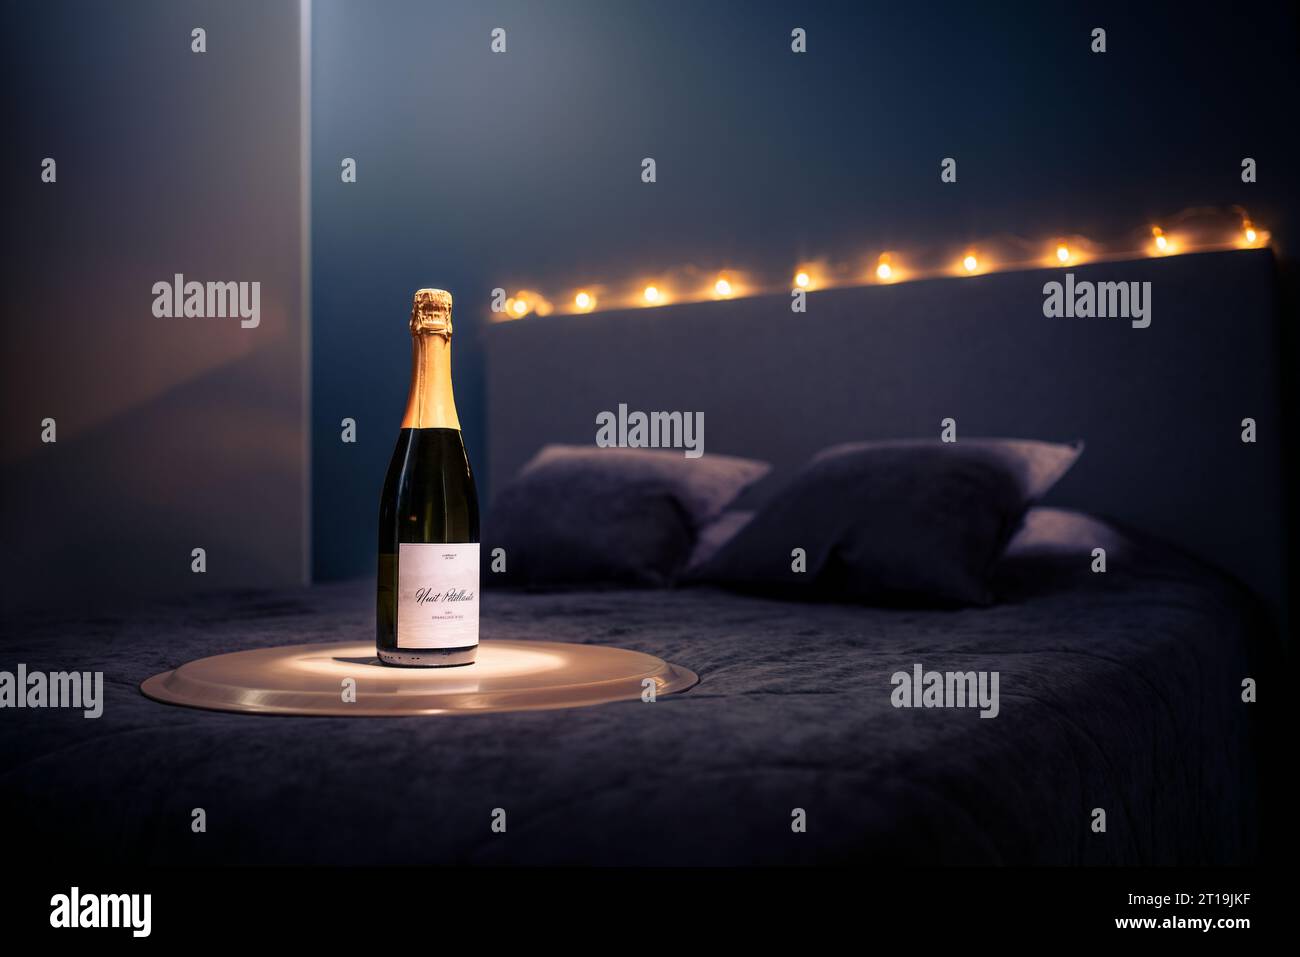 Champagne bottle on hotel room bed. Sparkling wine. Romantic couple date night, anniversary celebration or surprise on special day. Beautiful lights. Stock Photo